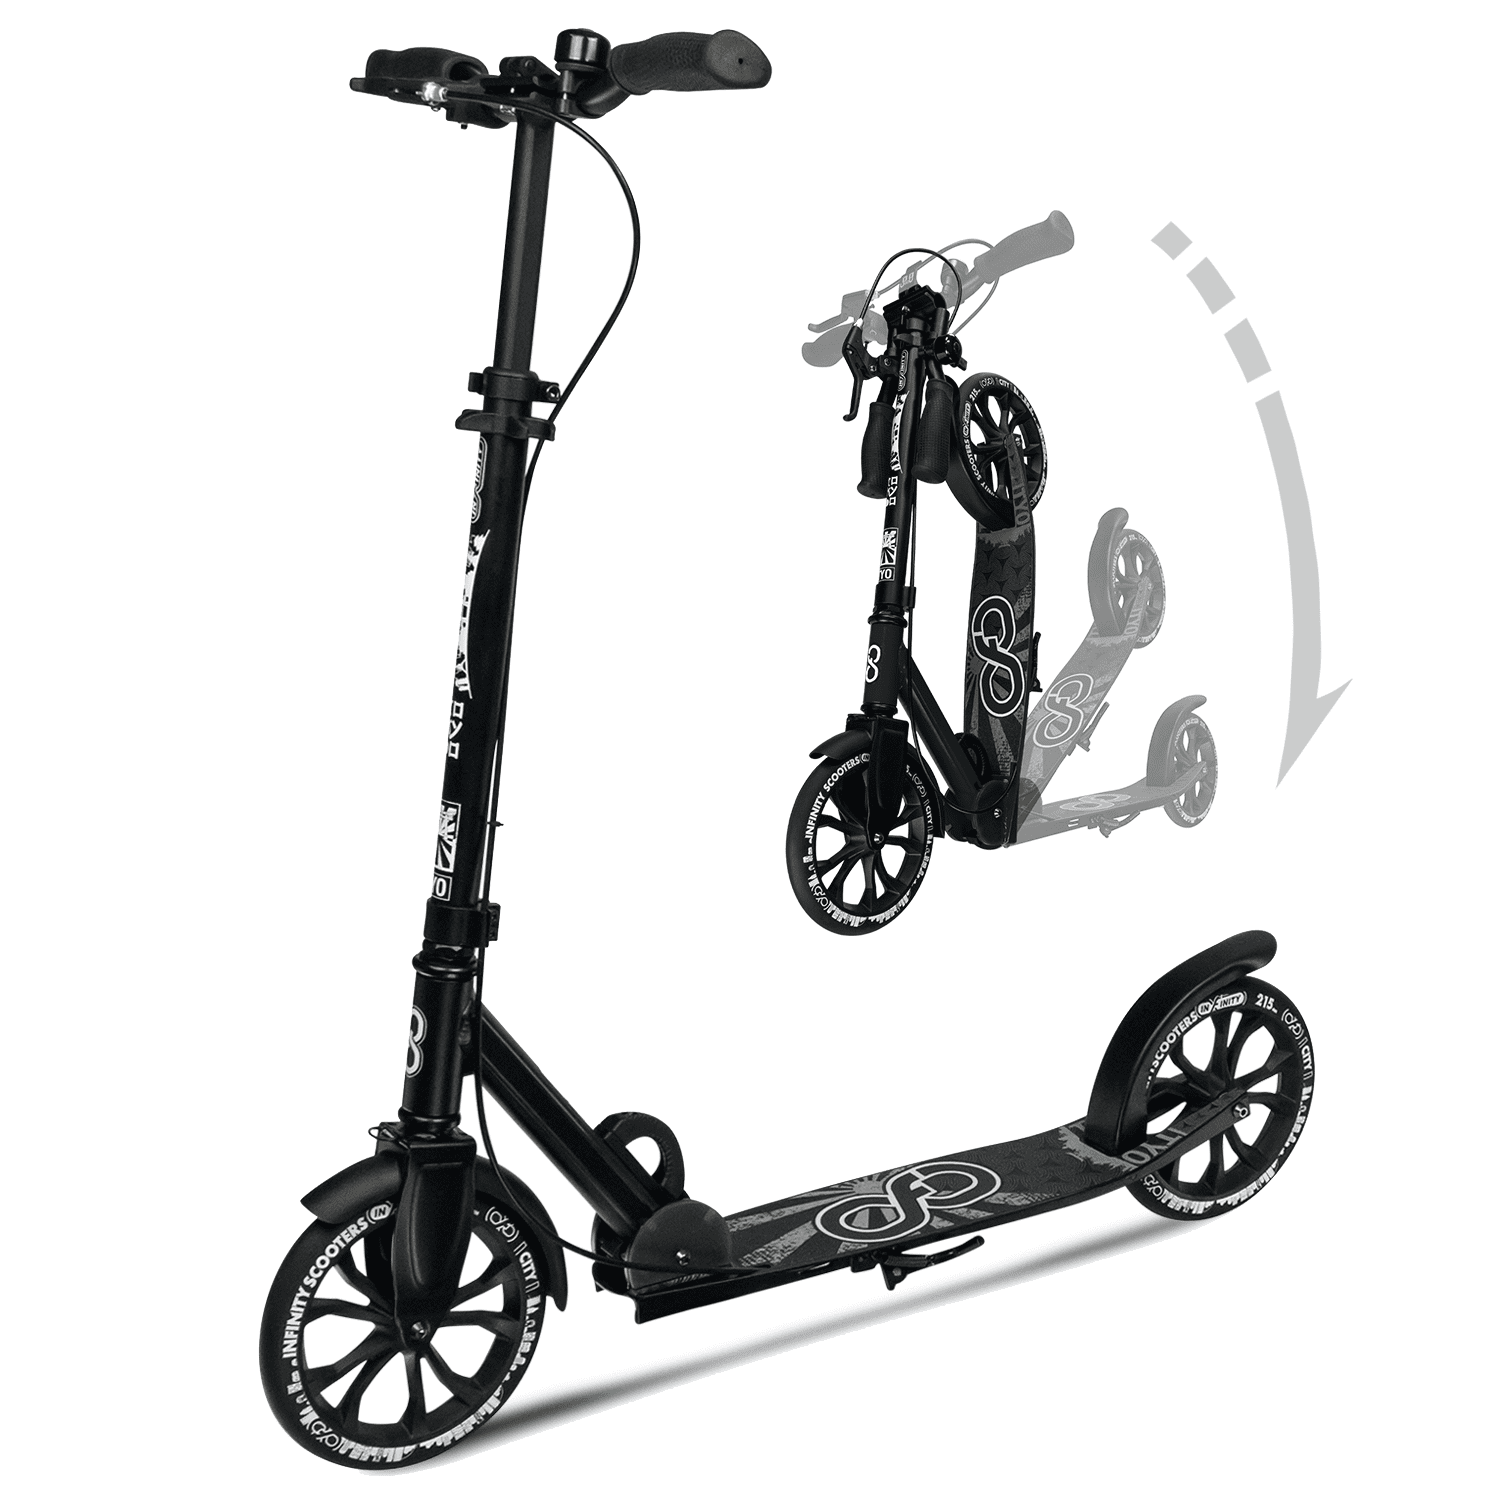 Adult City Push Kick Scooter with 180mm Big Wheels,Dual Suspension,Easy-Folding Adjustable Height Commuter Scooter,Supports 220lbs Weight 